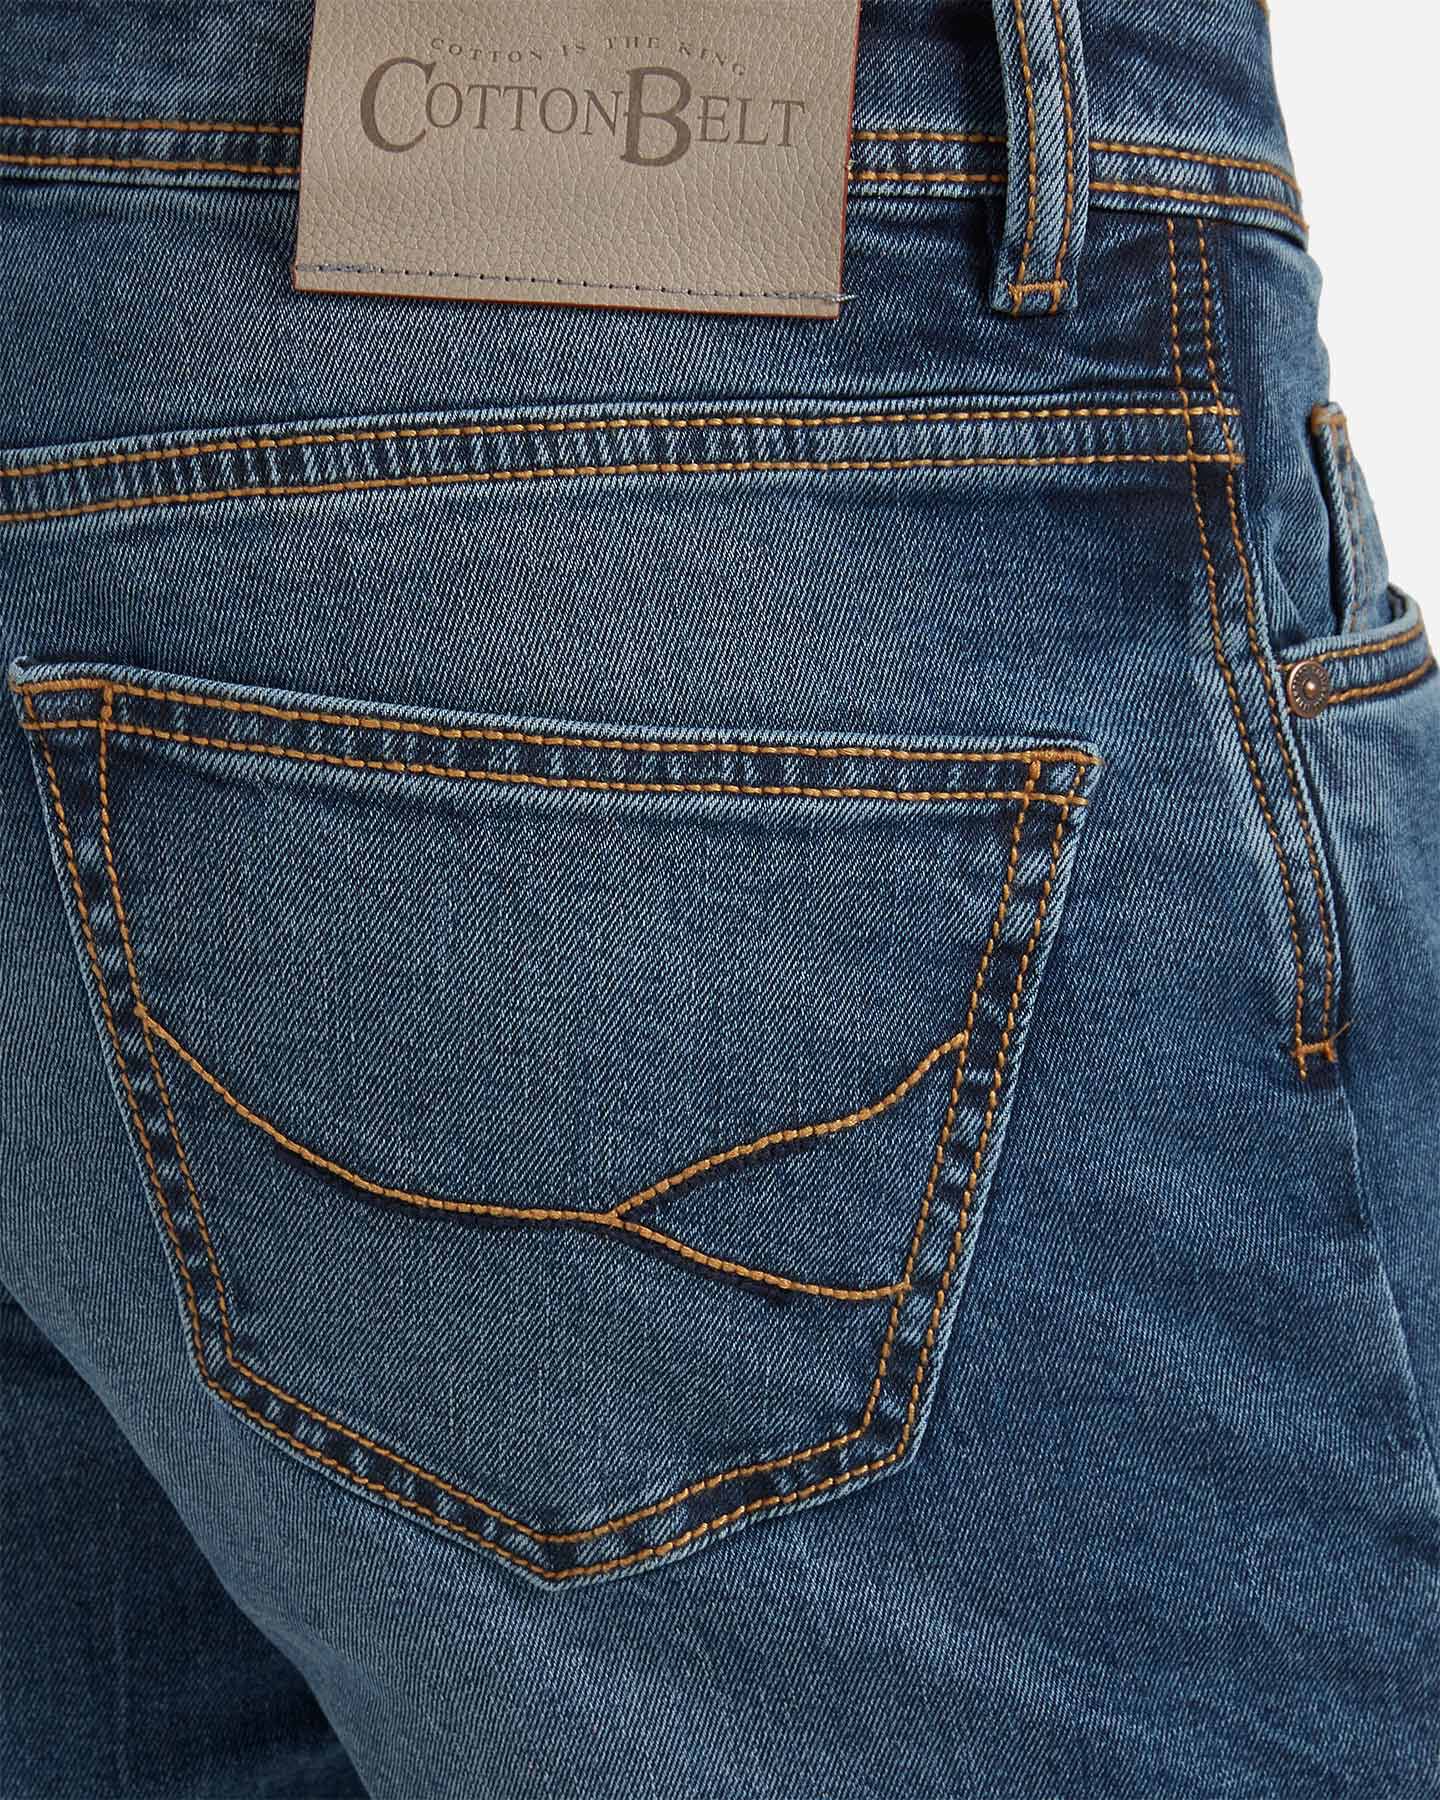  Jeans COTTON BELT 5TS MODERN M S4076653|MD|30 scatto 3